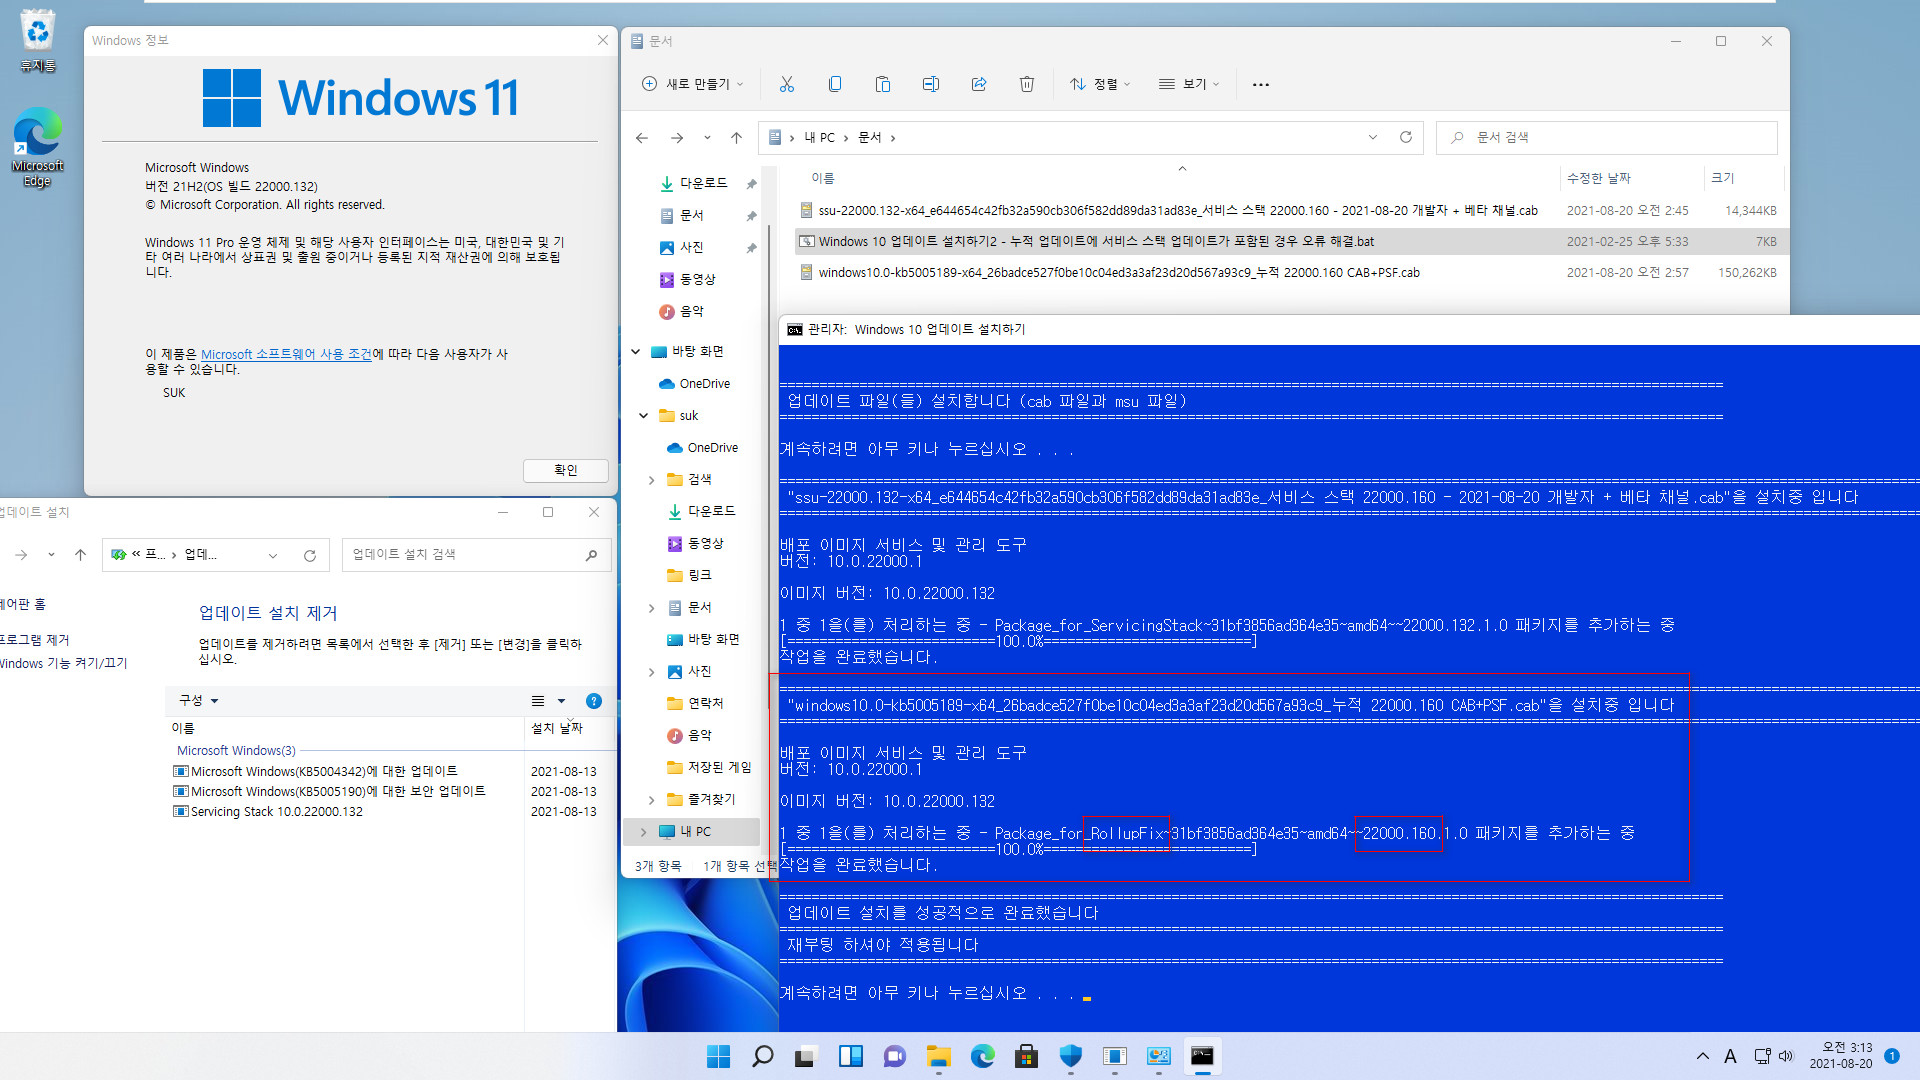 windows 11 insider preview build 22000.160